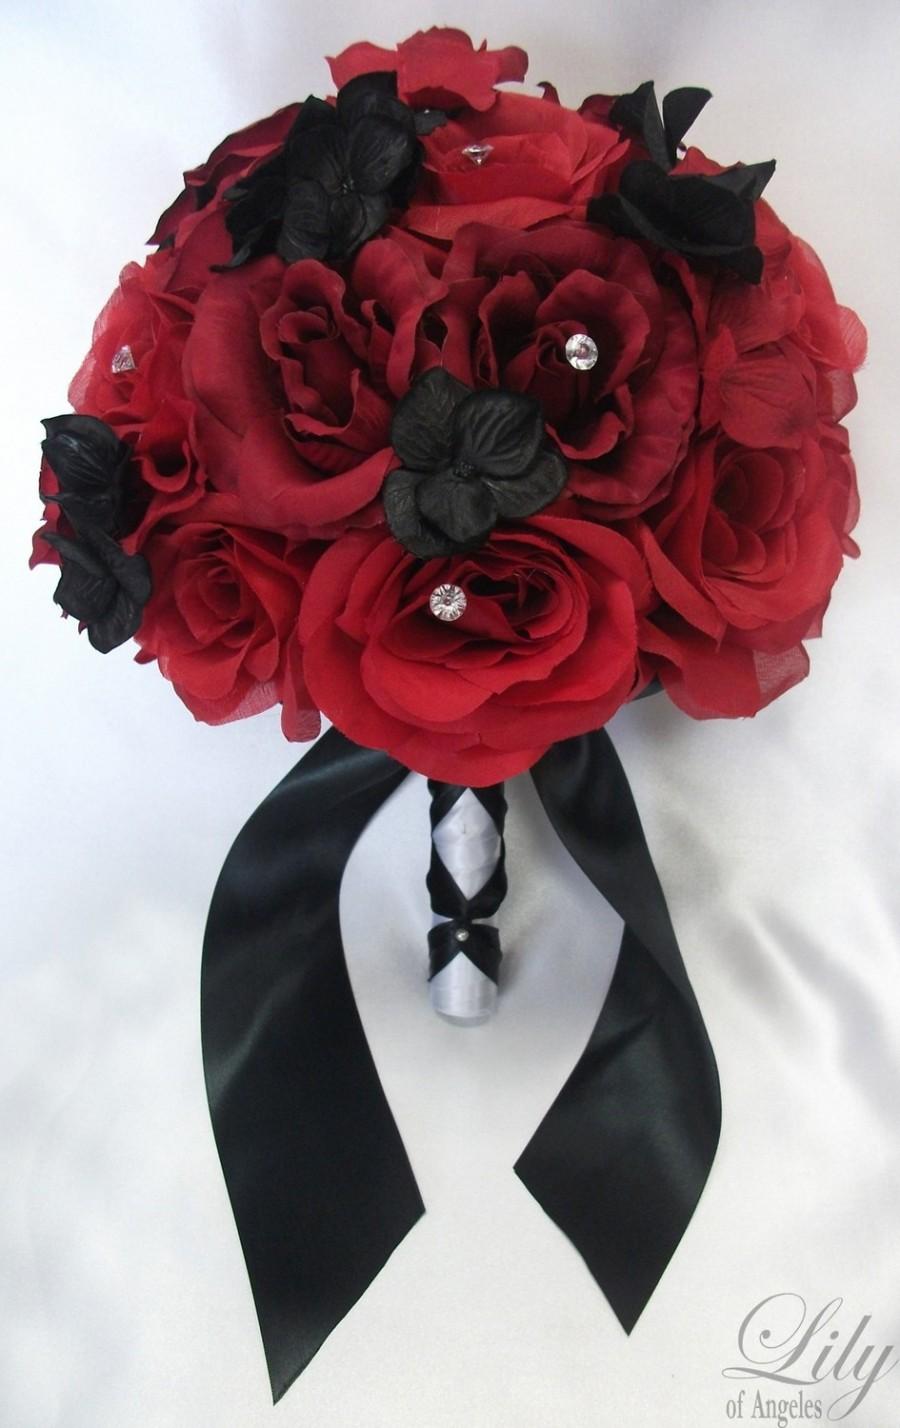 Свадьба - 17 Piece Package Wedding Bridal Bride Maid Of Honor Bridesmaid Bouquet Boutonniere Corsage Silk Flower RED BLACK "Lily Of Angeles" REBK03